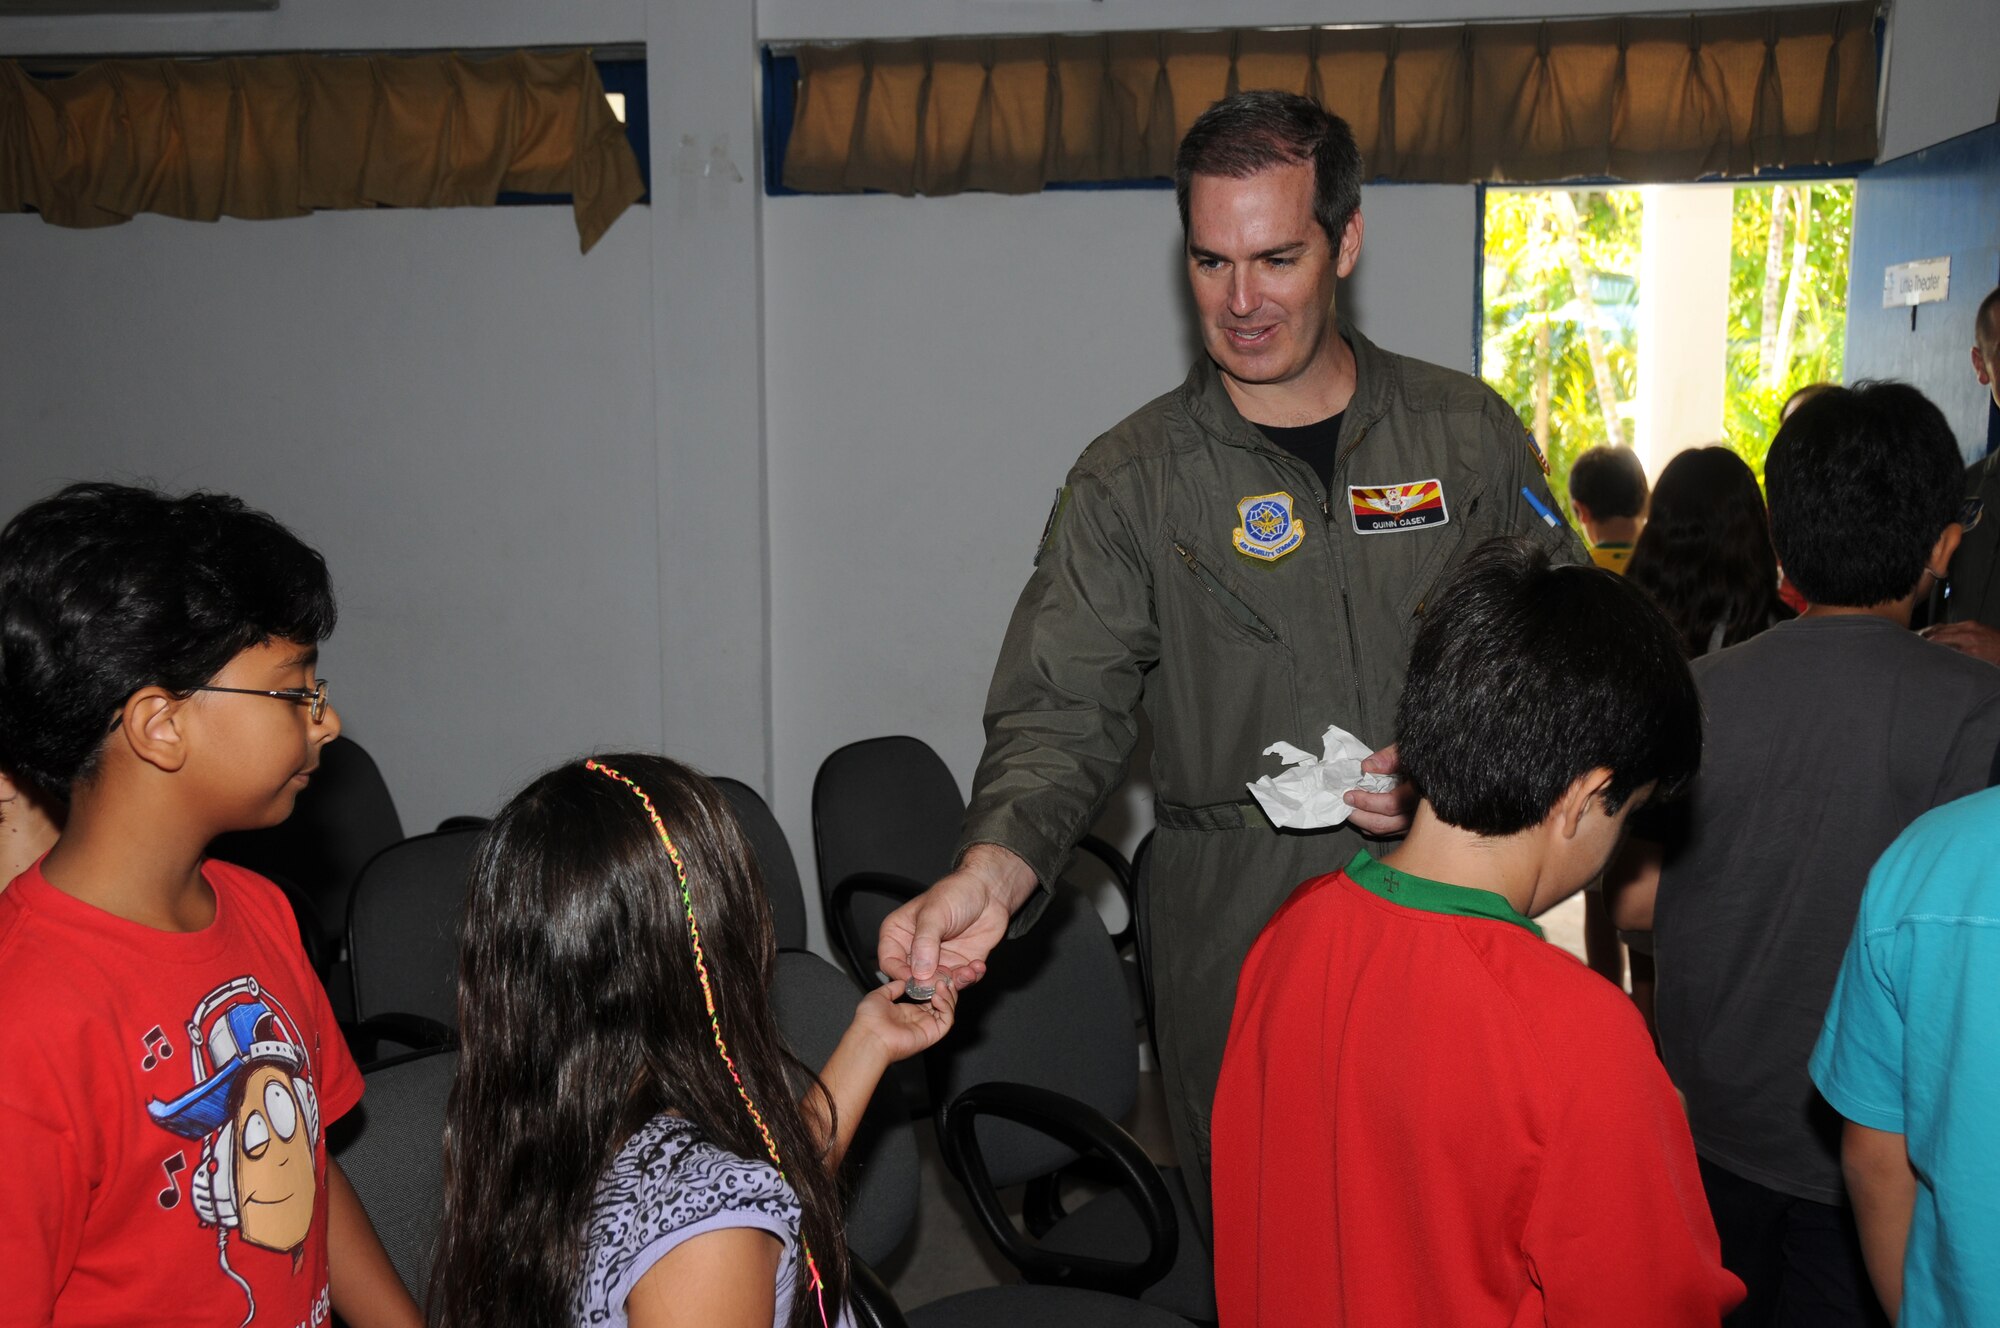 Major Quinn Casey of the 161st Air Refueling Wing, Phoenix, Ariz., hands out coins to students from the American School of Recife on November 17, 2010, in Recife, Brazil. The 161st ARW is participating in CRUZEX V, or Cruzeiro Do Sul (Southern Cross).  CRUZEX  is a multi-national combined exercise involving the Air Forces of Argentina, Brazil, Chile, France and Uruguay, and observers from numerous other countries with more than 82 aircraft and almost 3,000 Airmen involved.



U.S. Air Force Photo by Master Sgt. Kelly Deitloff

